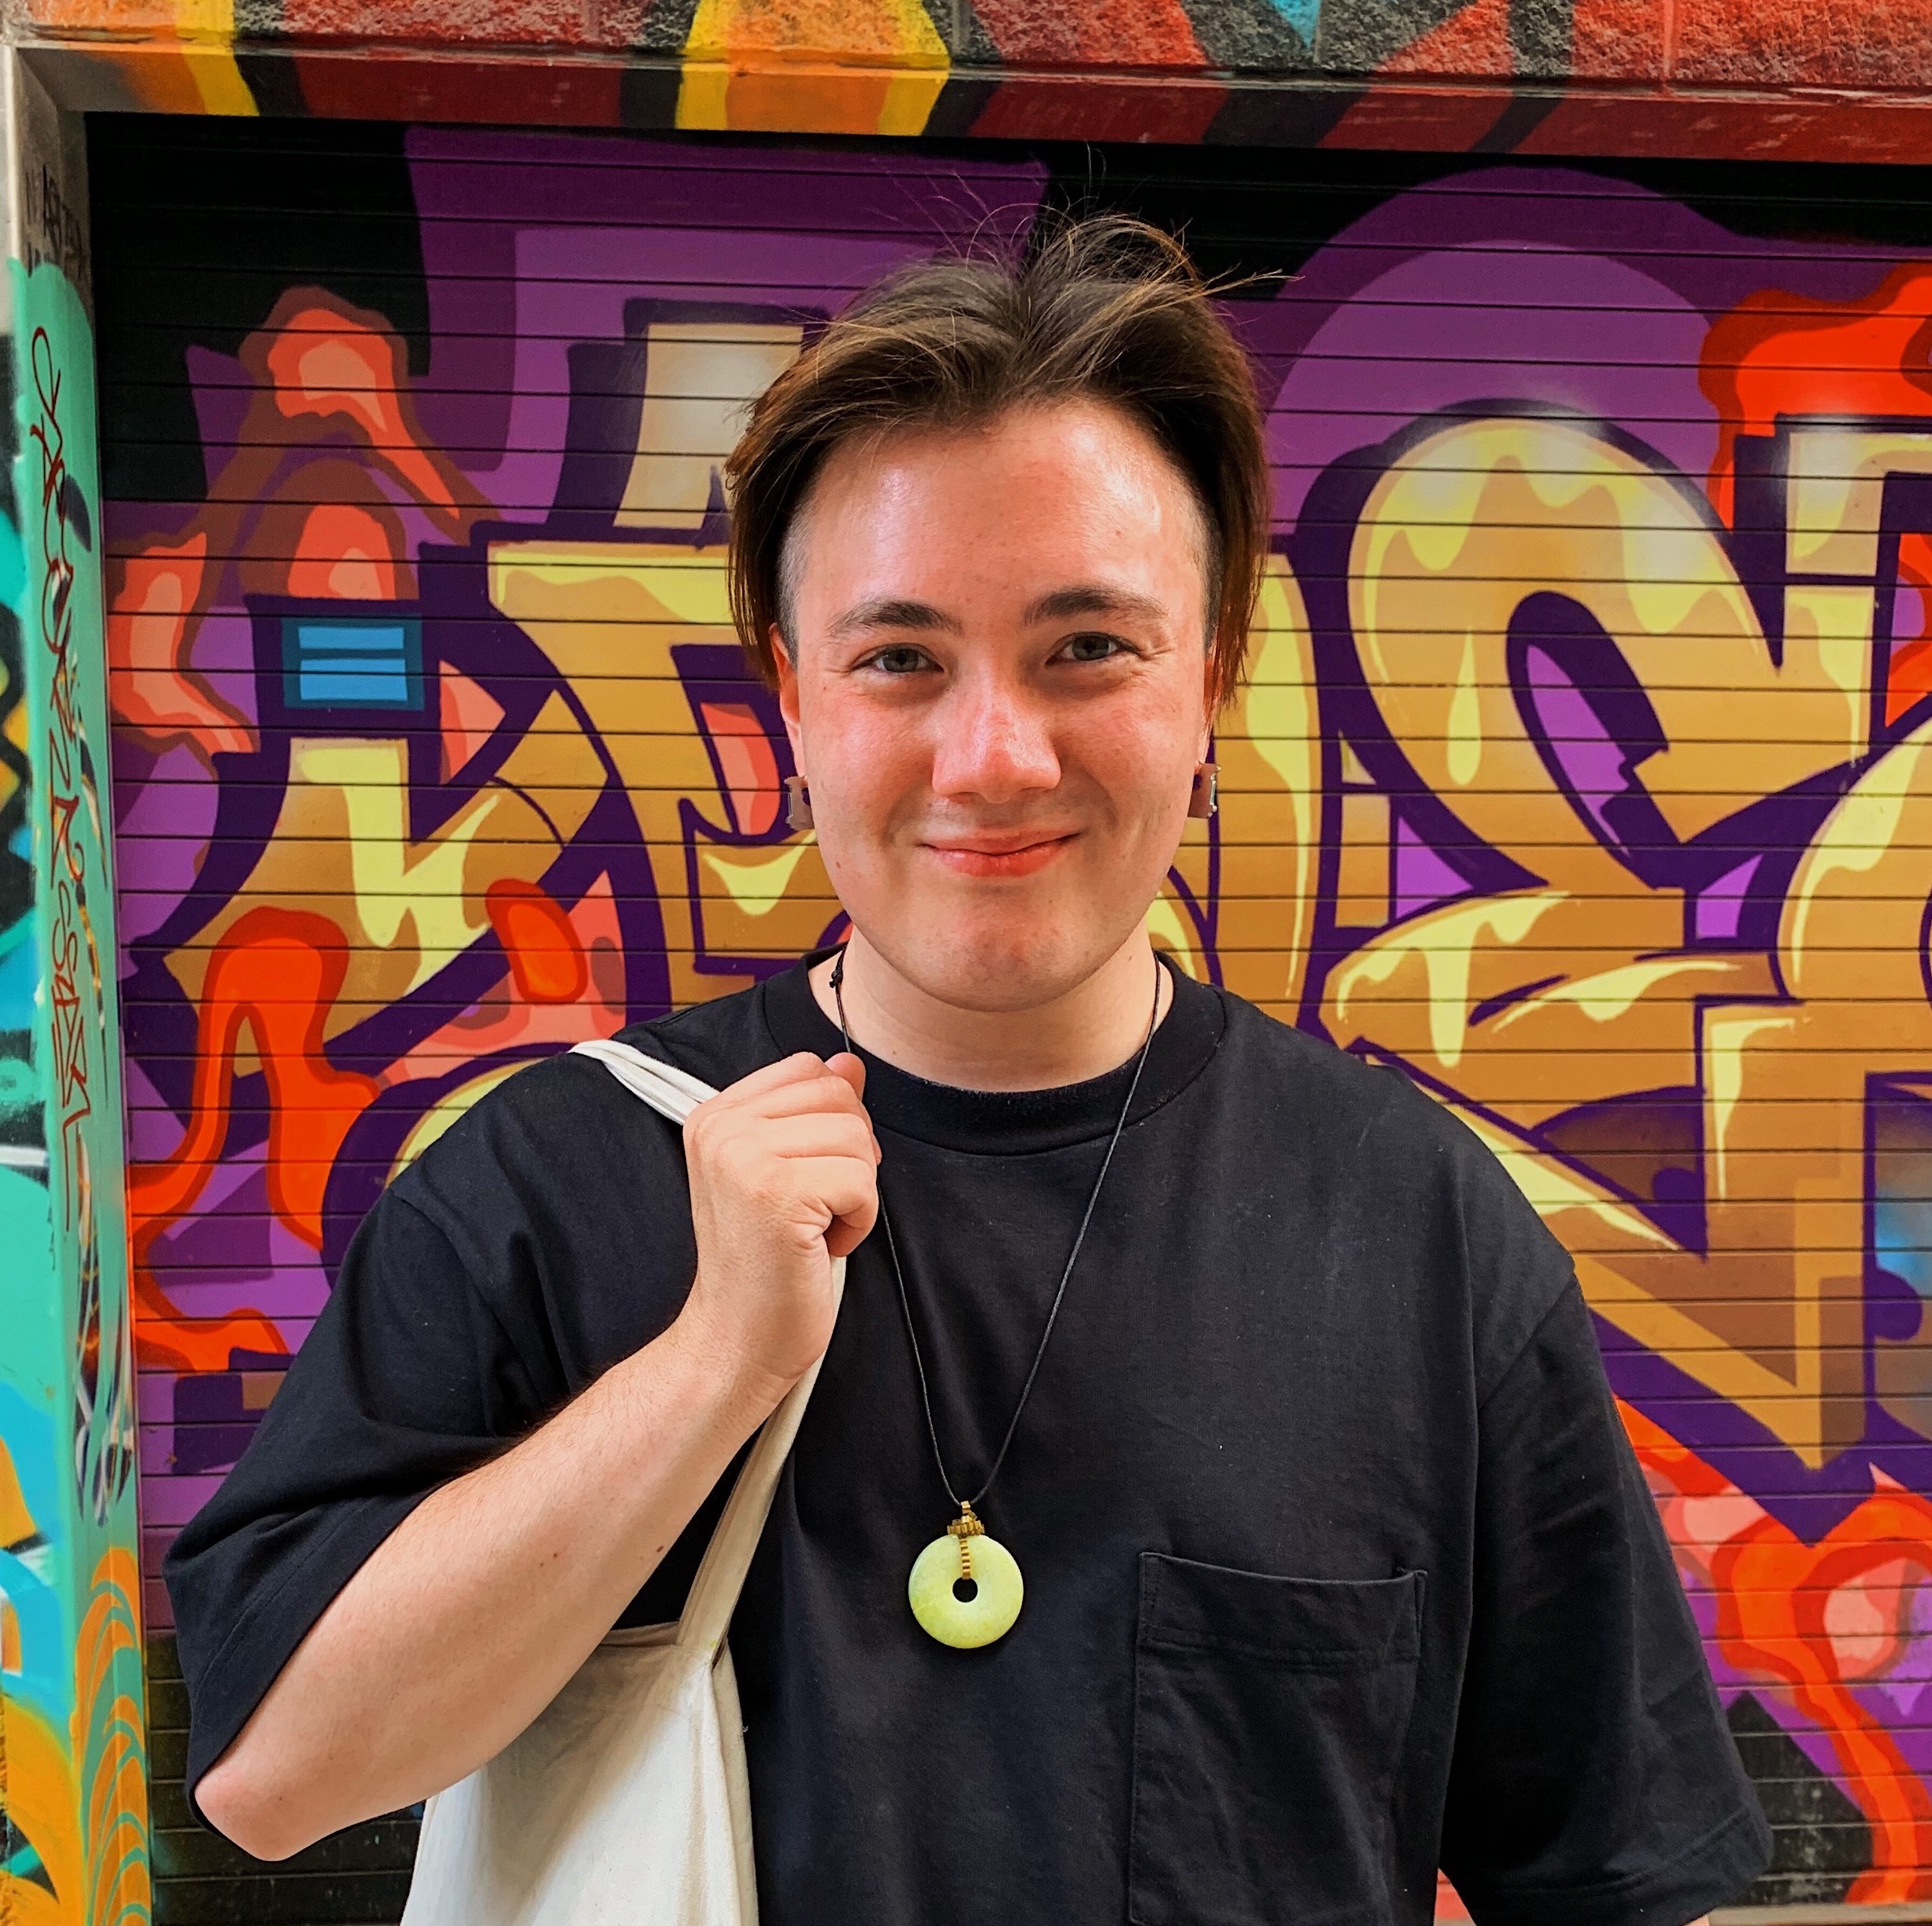 Thomas smiling and standing in front of a colourful mural.